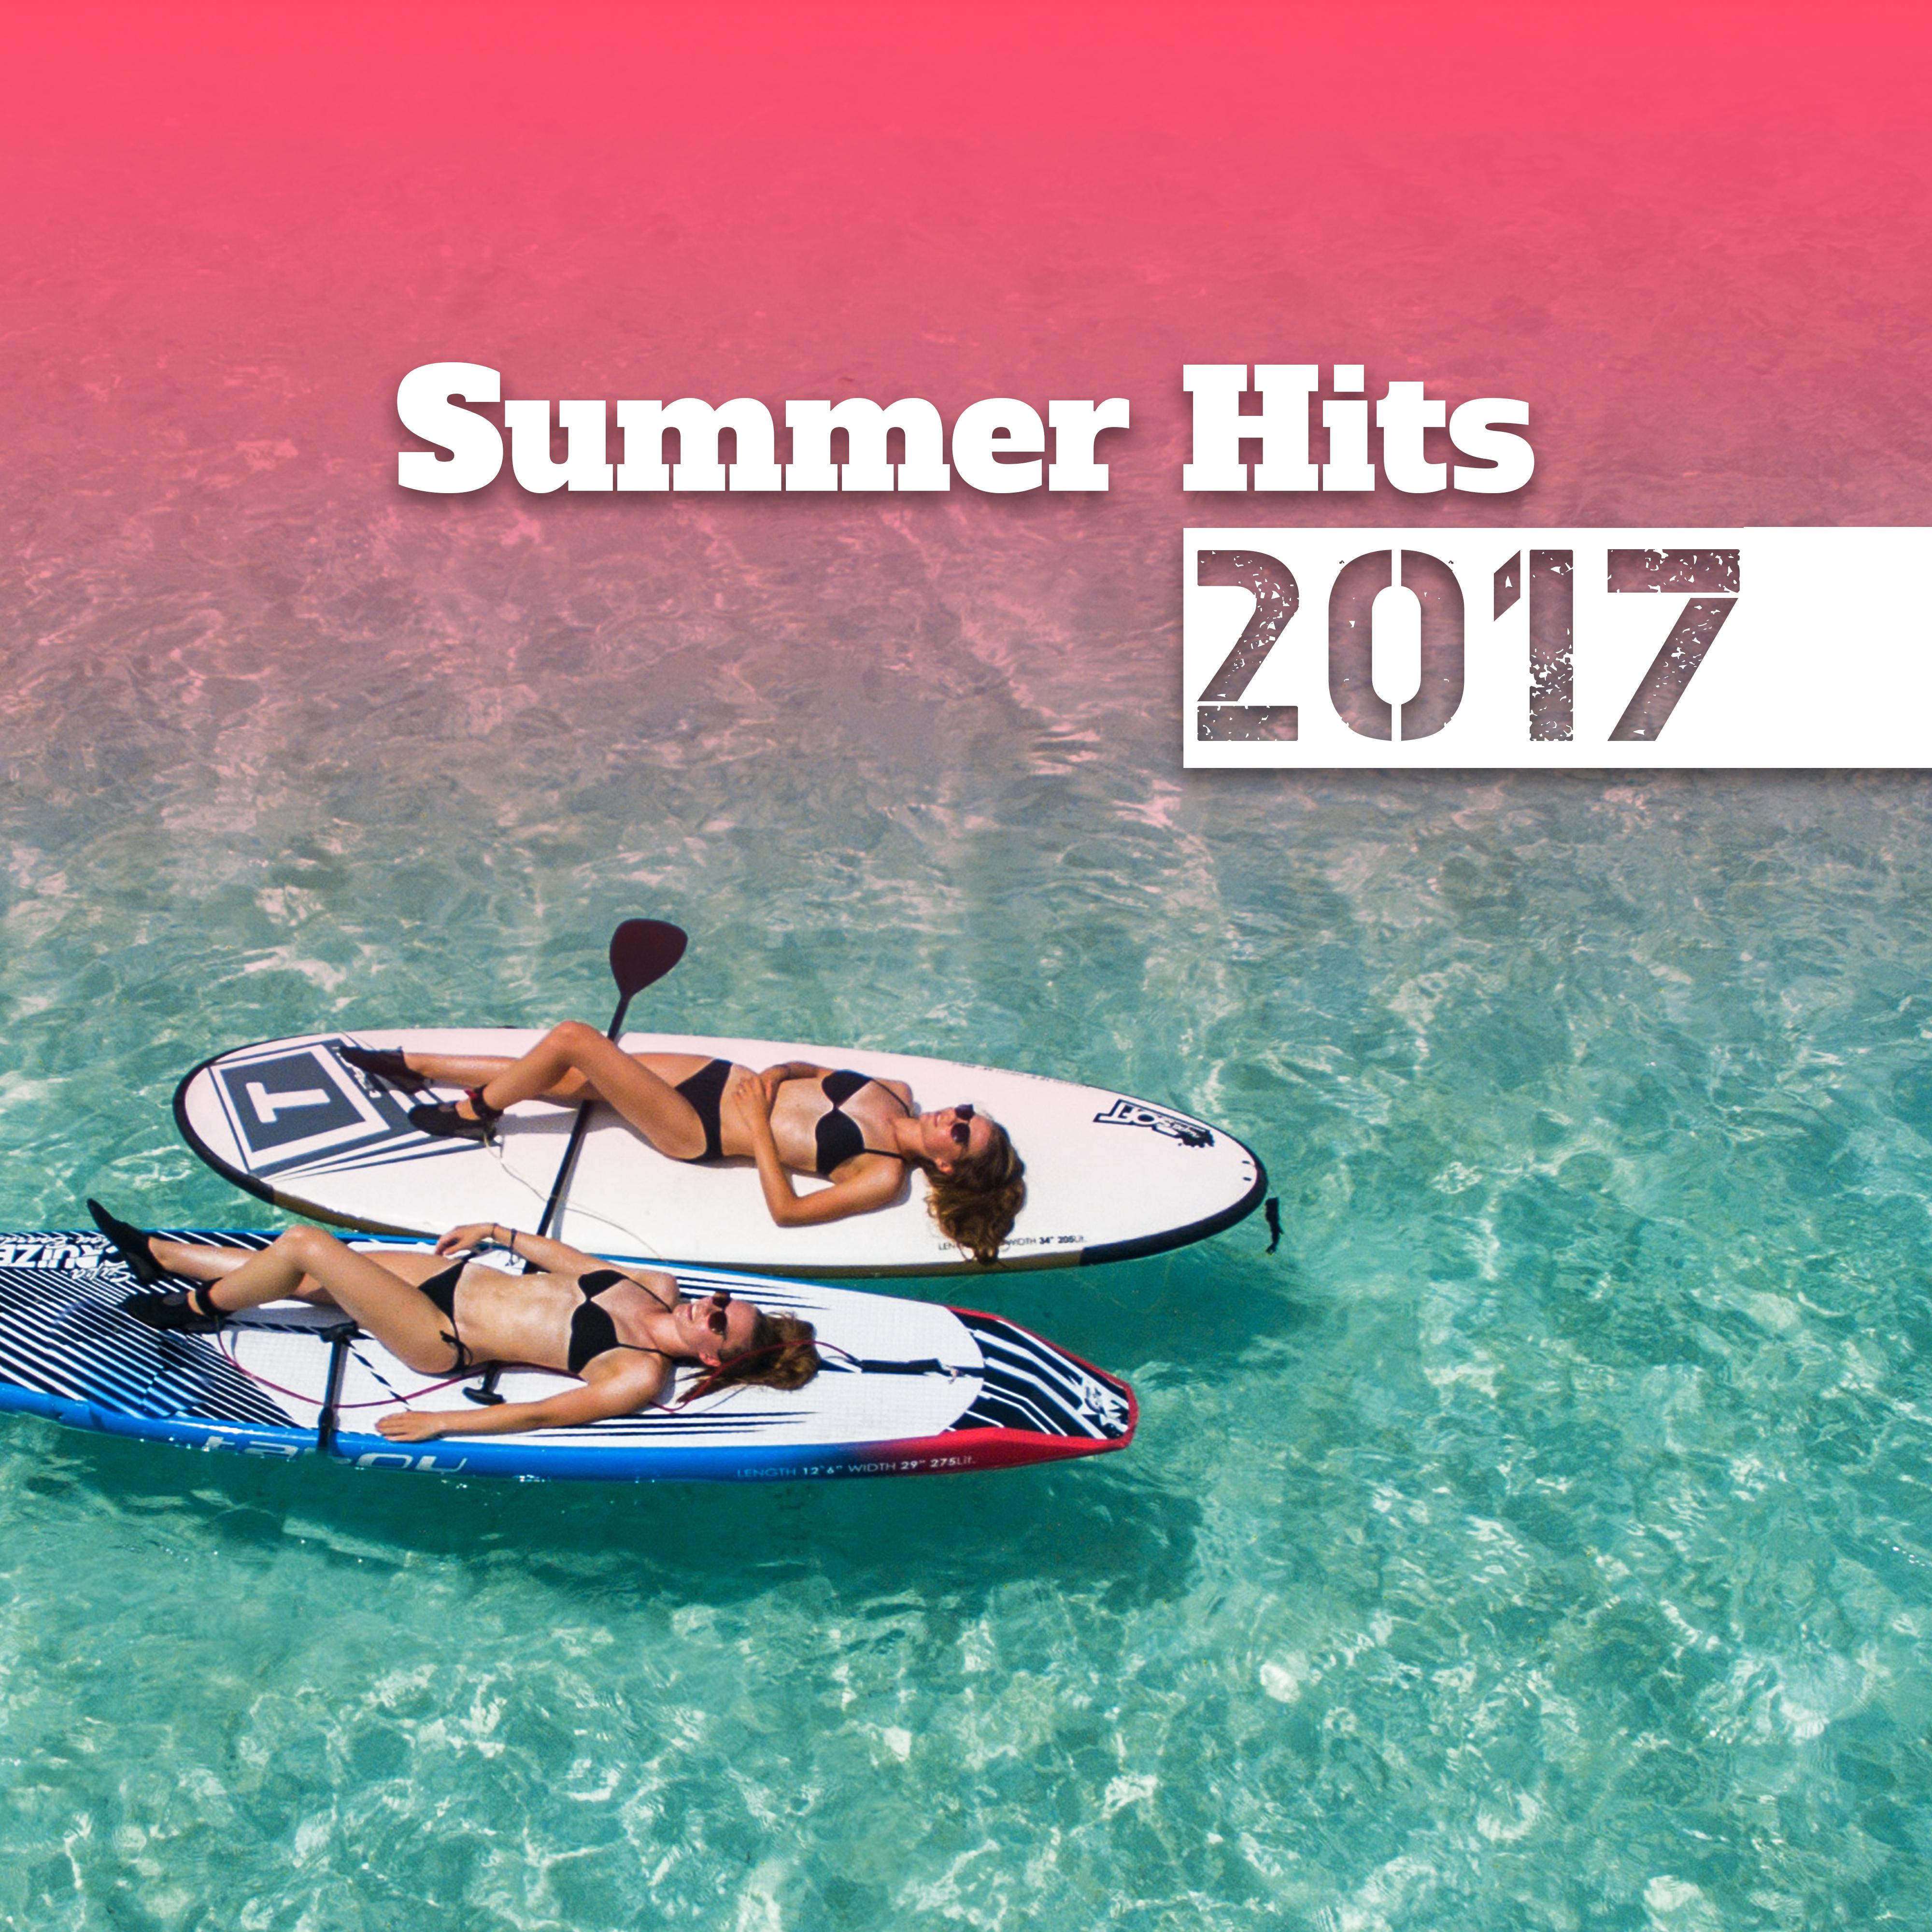 Summer Hits 2017 – Chill Out Music, Party on the Beach, Swimming Pool, Total Relaxation